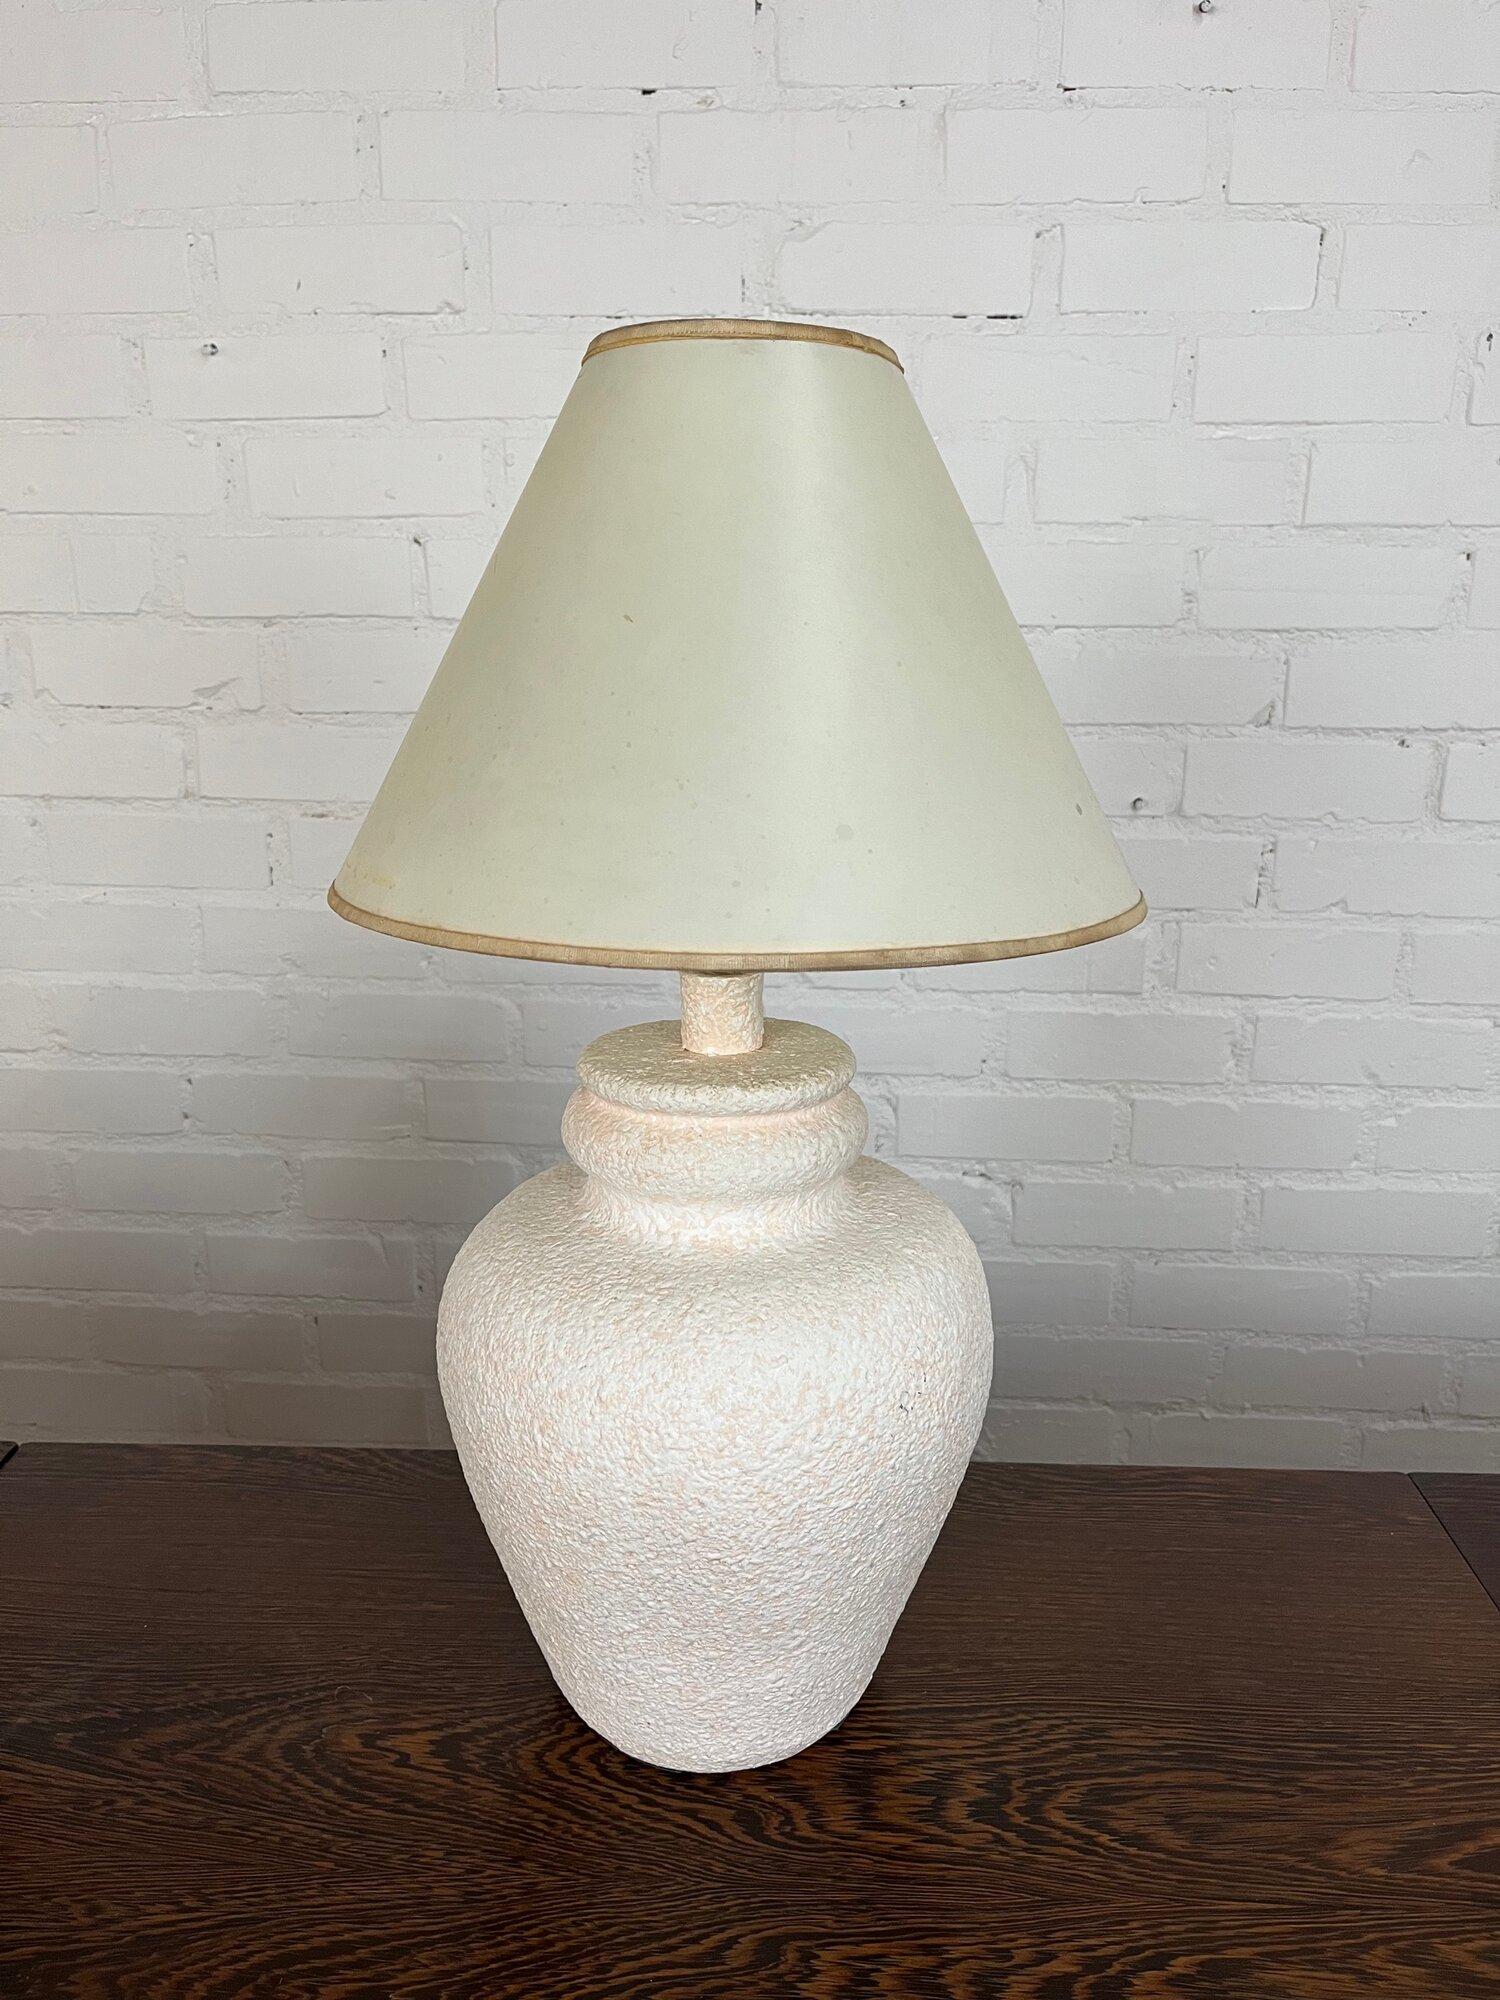 Ceramic Pink and White Vintage Table Lamps 'No Shade' For Sale